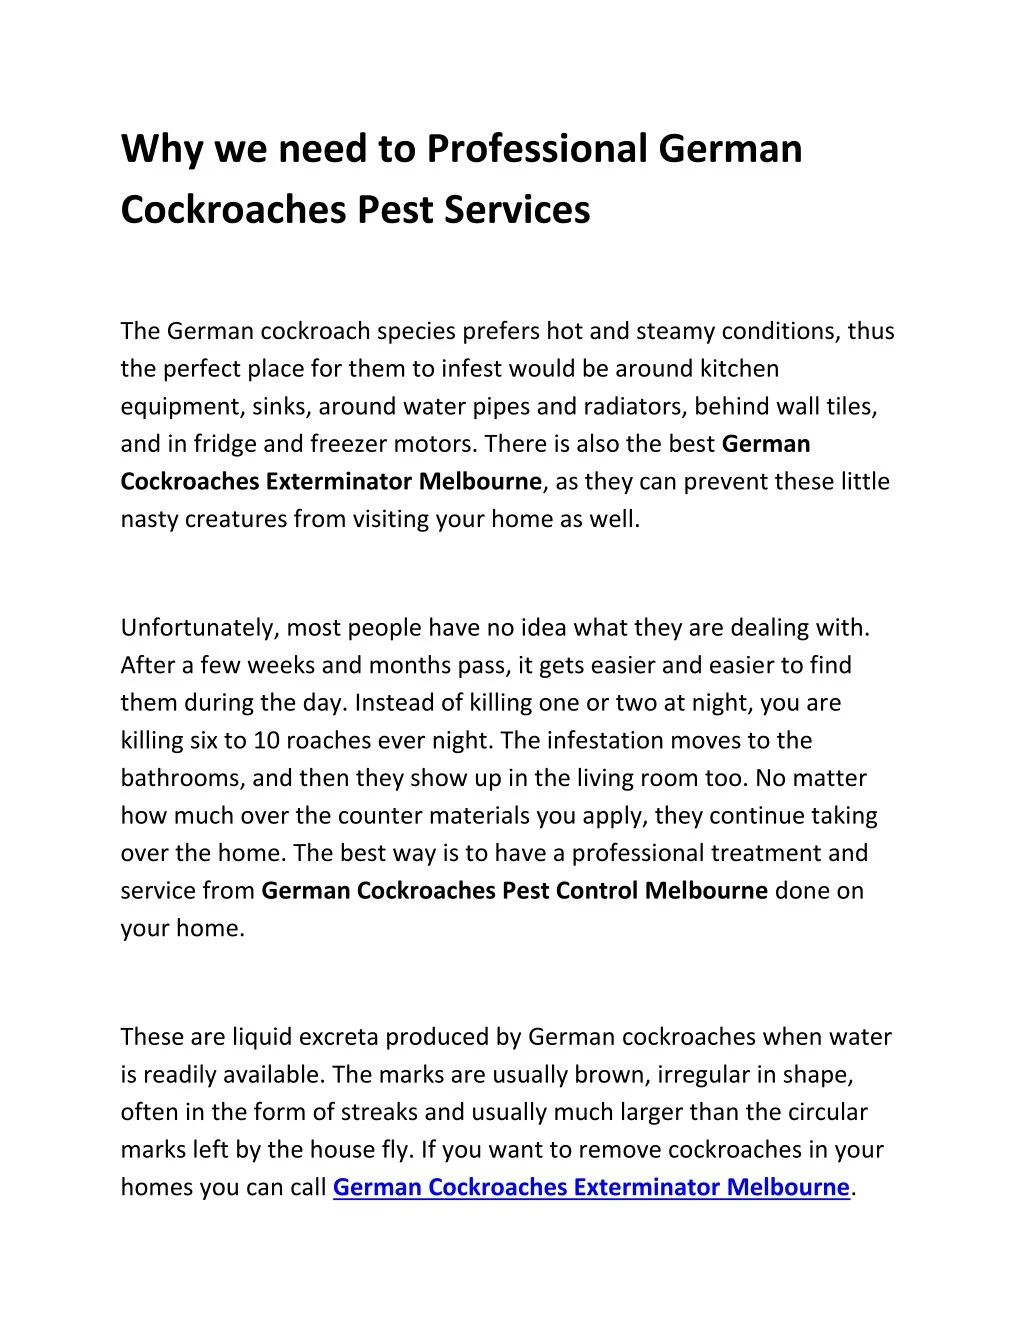 why we need to professional german cockroaches